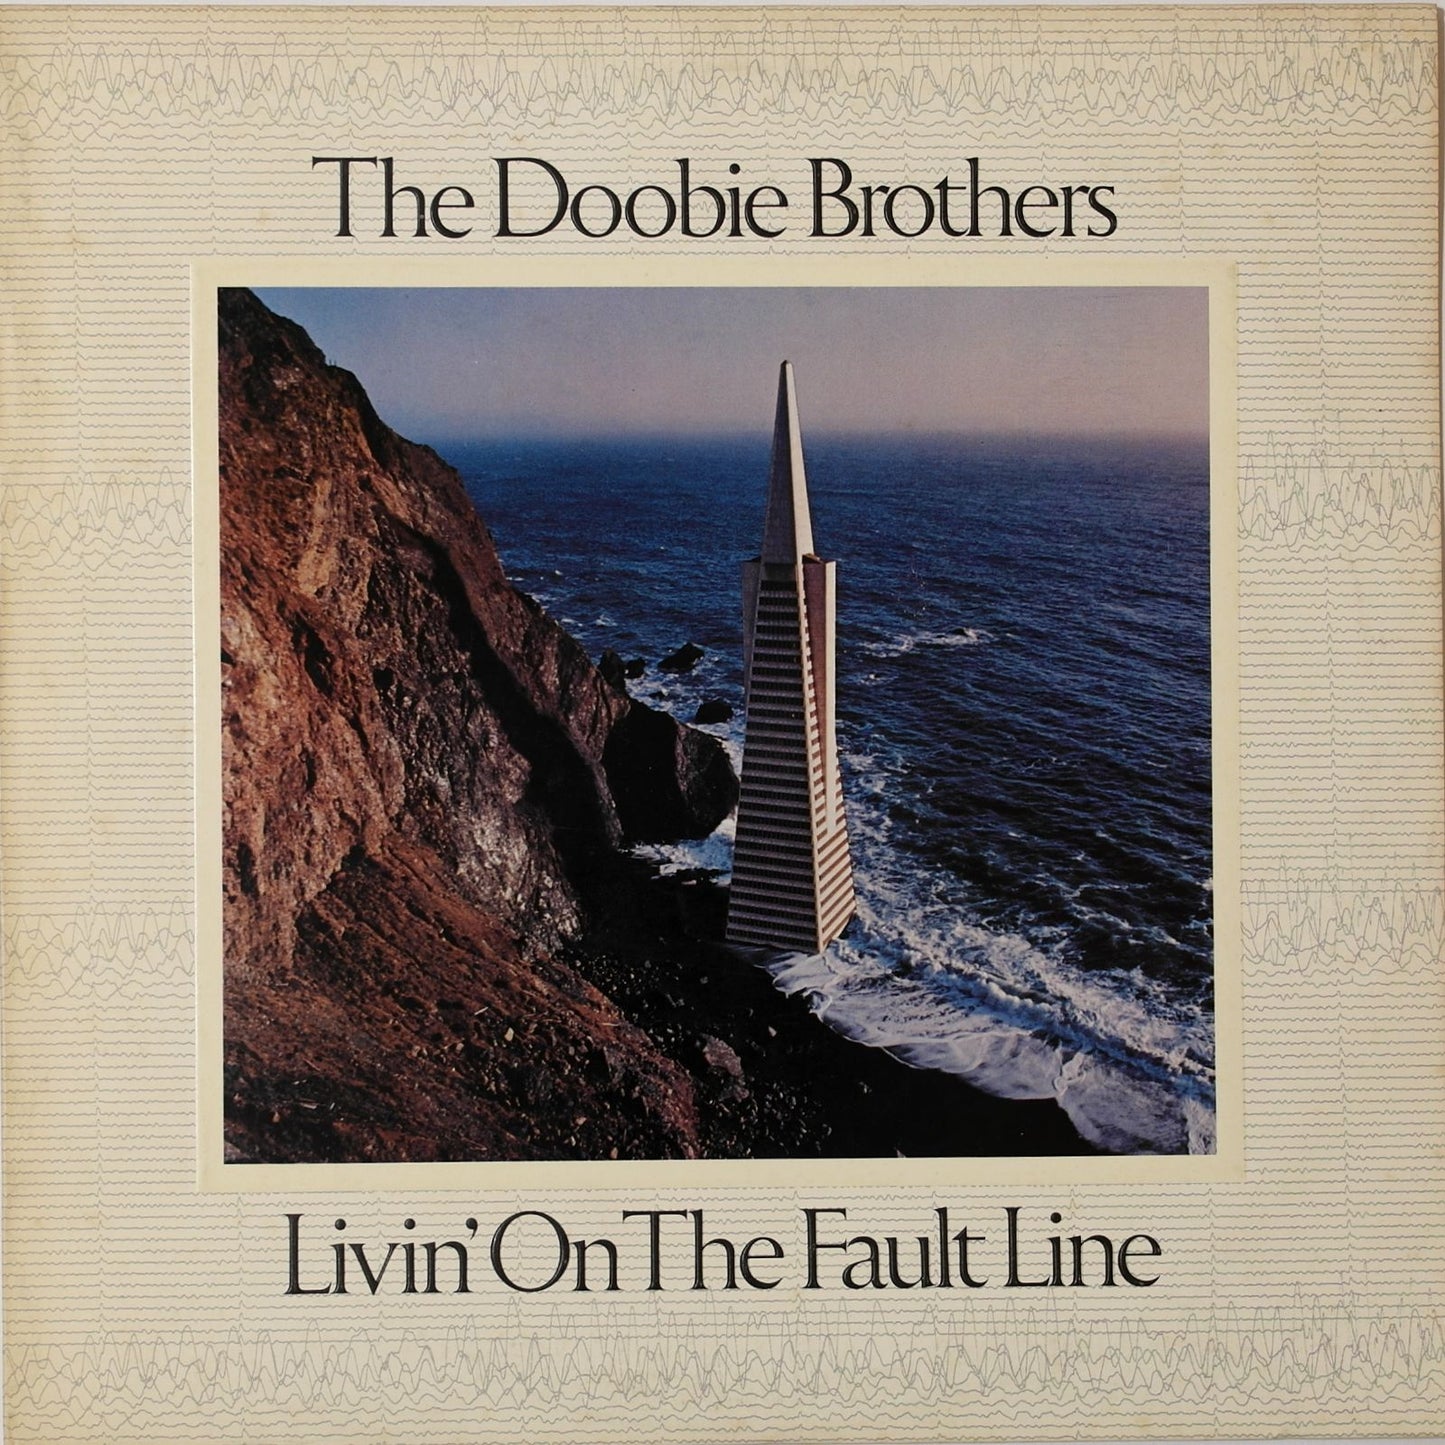 THE DOOBIE BROTHERS - Livin' On The Fault Line